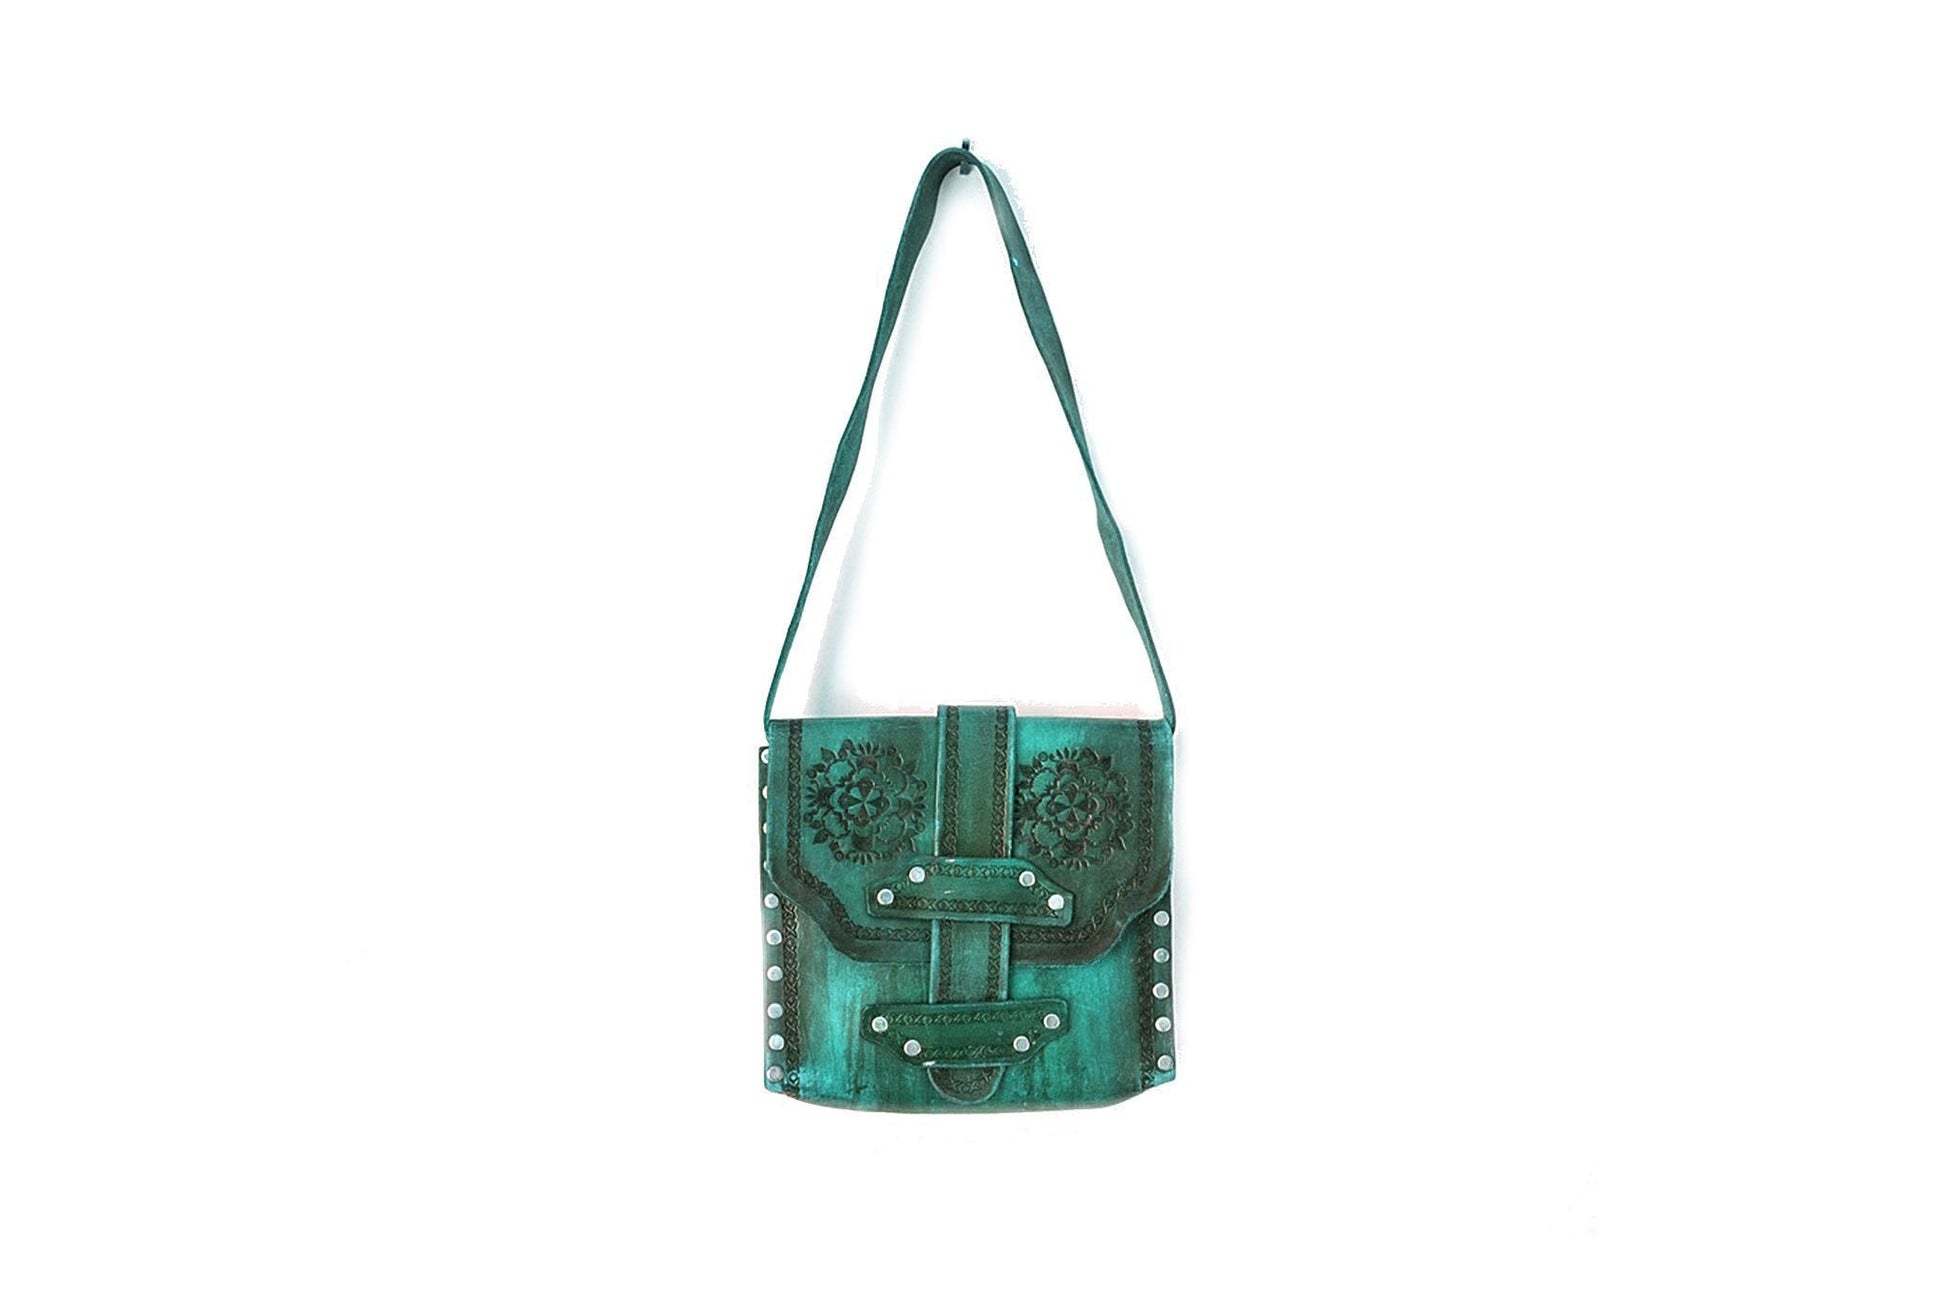 Artisanal Bags Dark Turquoise Embroidered Leather Shoulder Bag - Multiple Price A799335